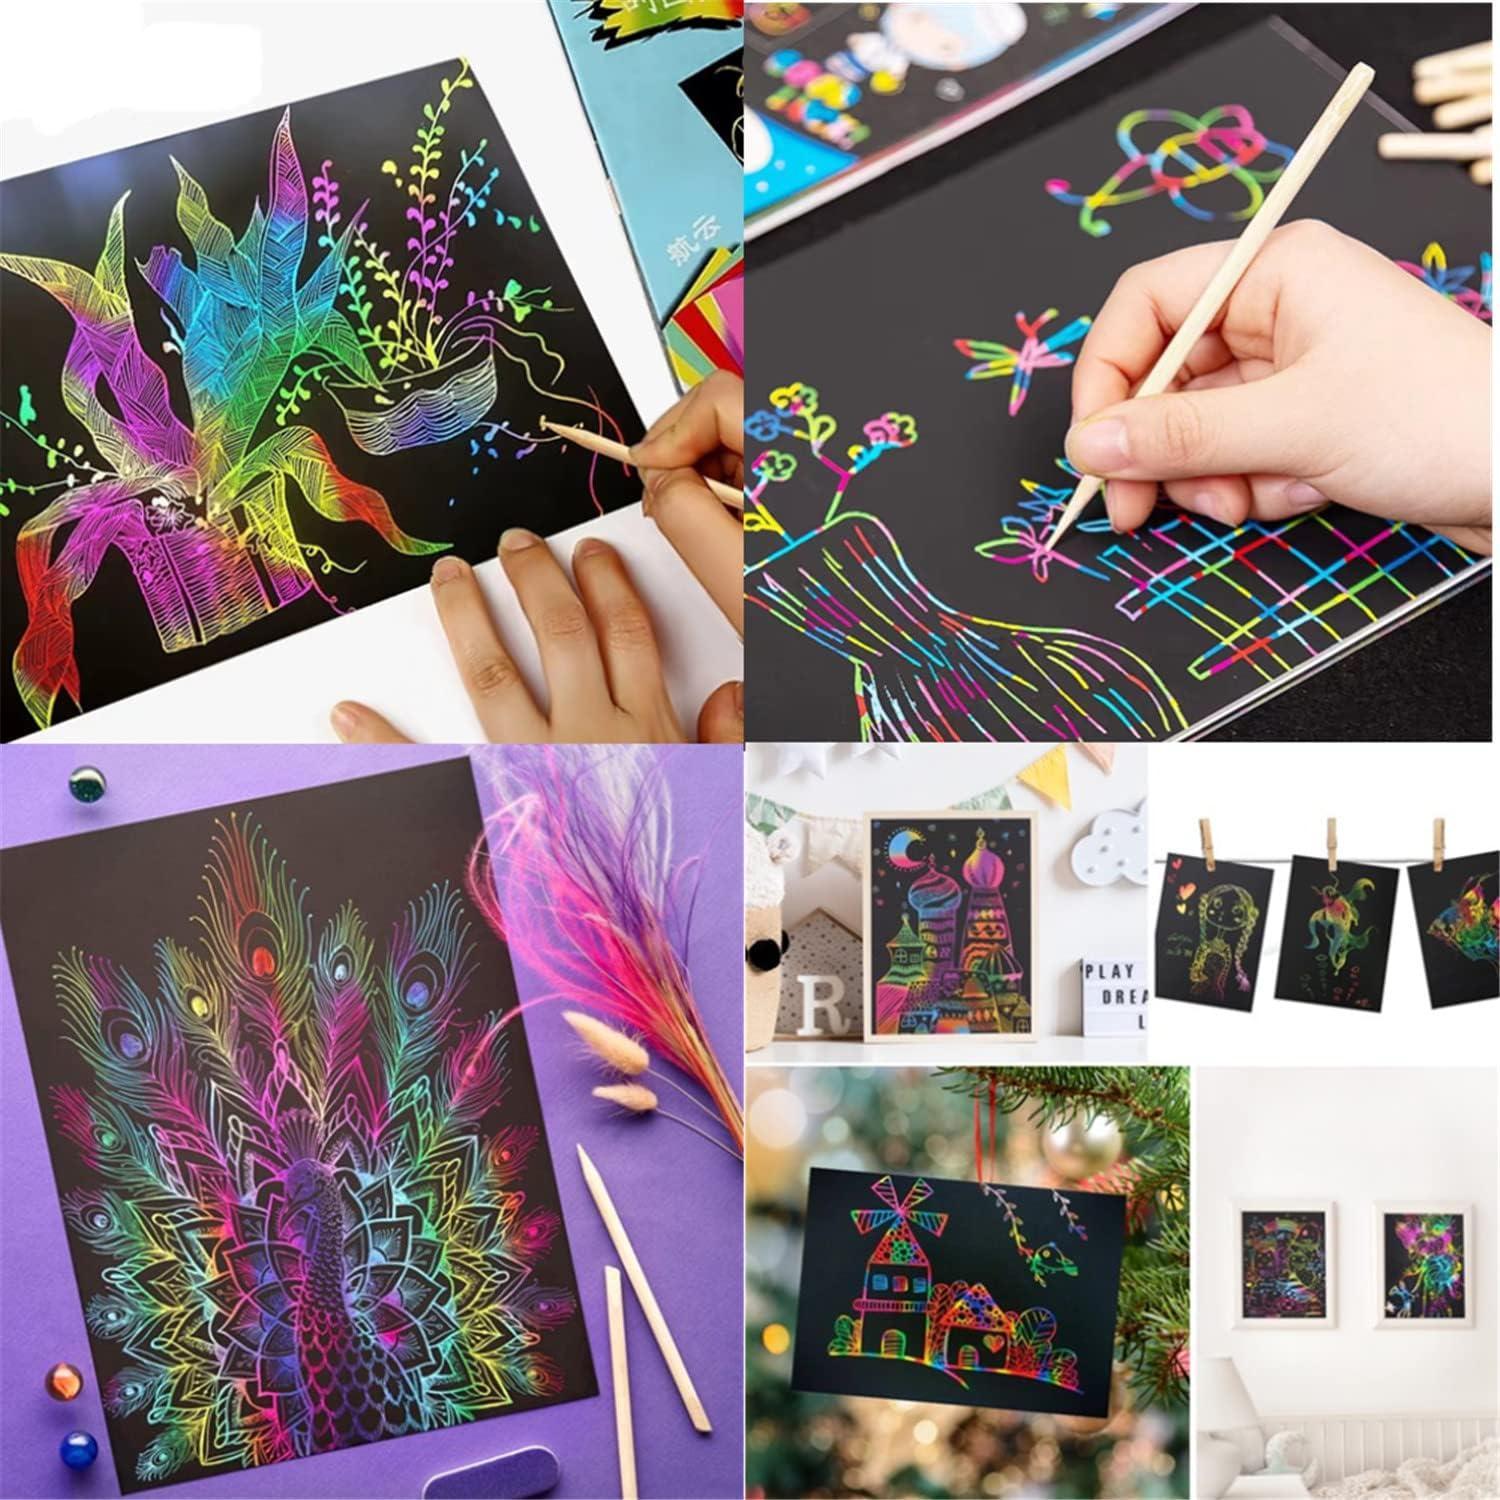 yesogreat Scratch Art Books for Kids, Rainbow Scratch Paper Black Scratch  it Off Art Crafts Notes Boards Sheet with 1 Wooden Stylus for Best Gifts  1PCS